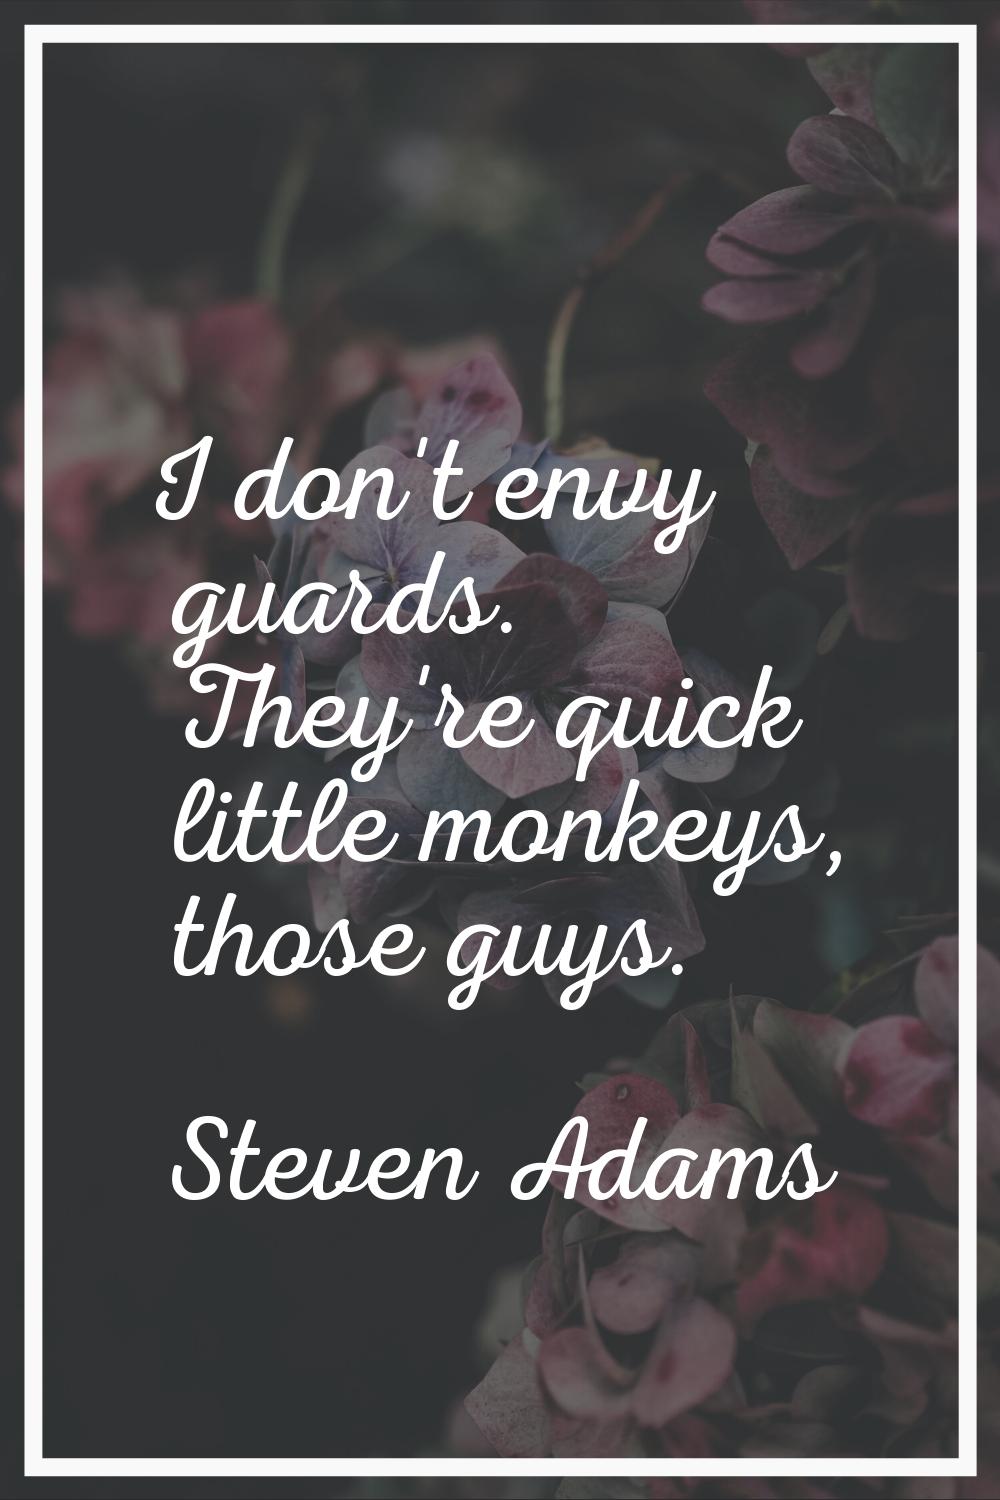 I don't envy guards. They're quick little monkeys, those guys.